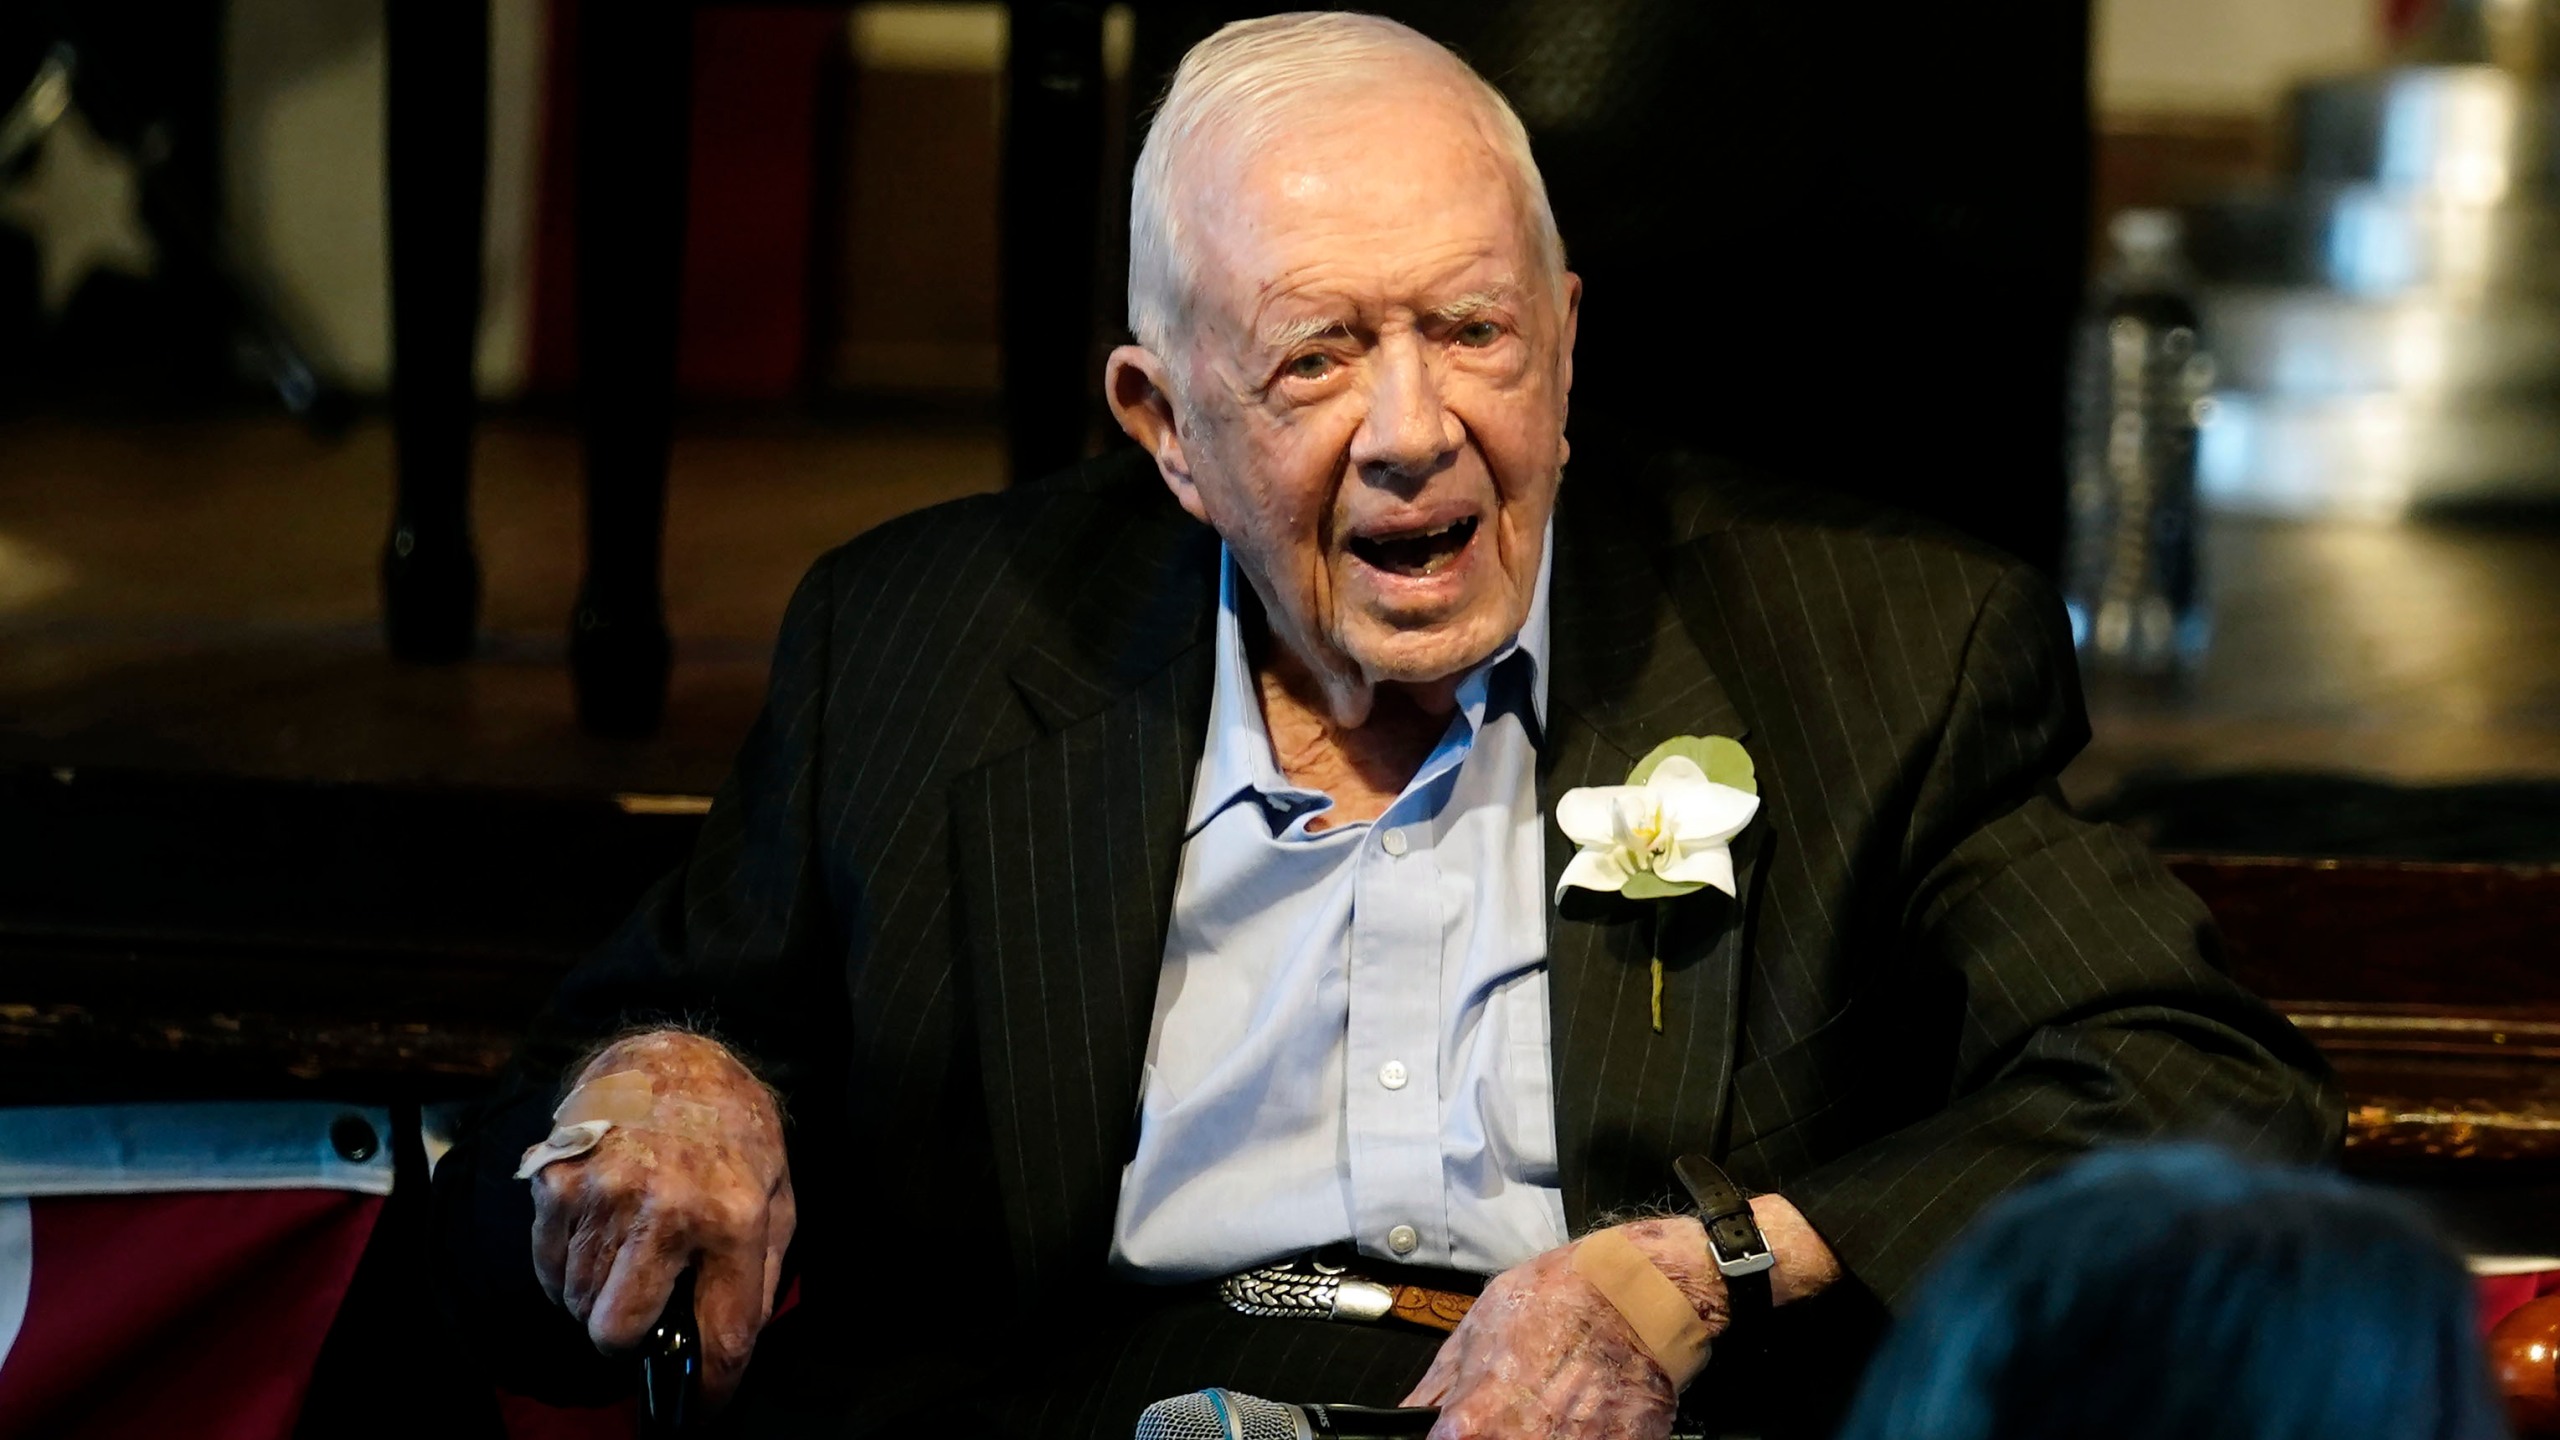 Foundation: Former President Jimmy Carter in hospice care